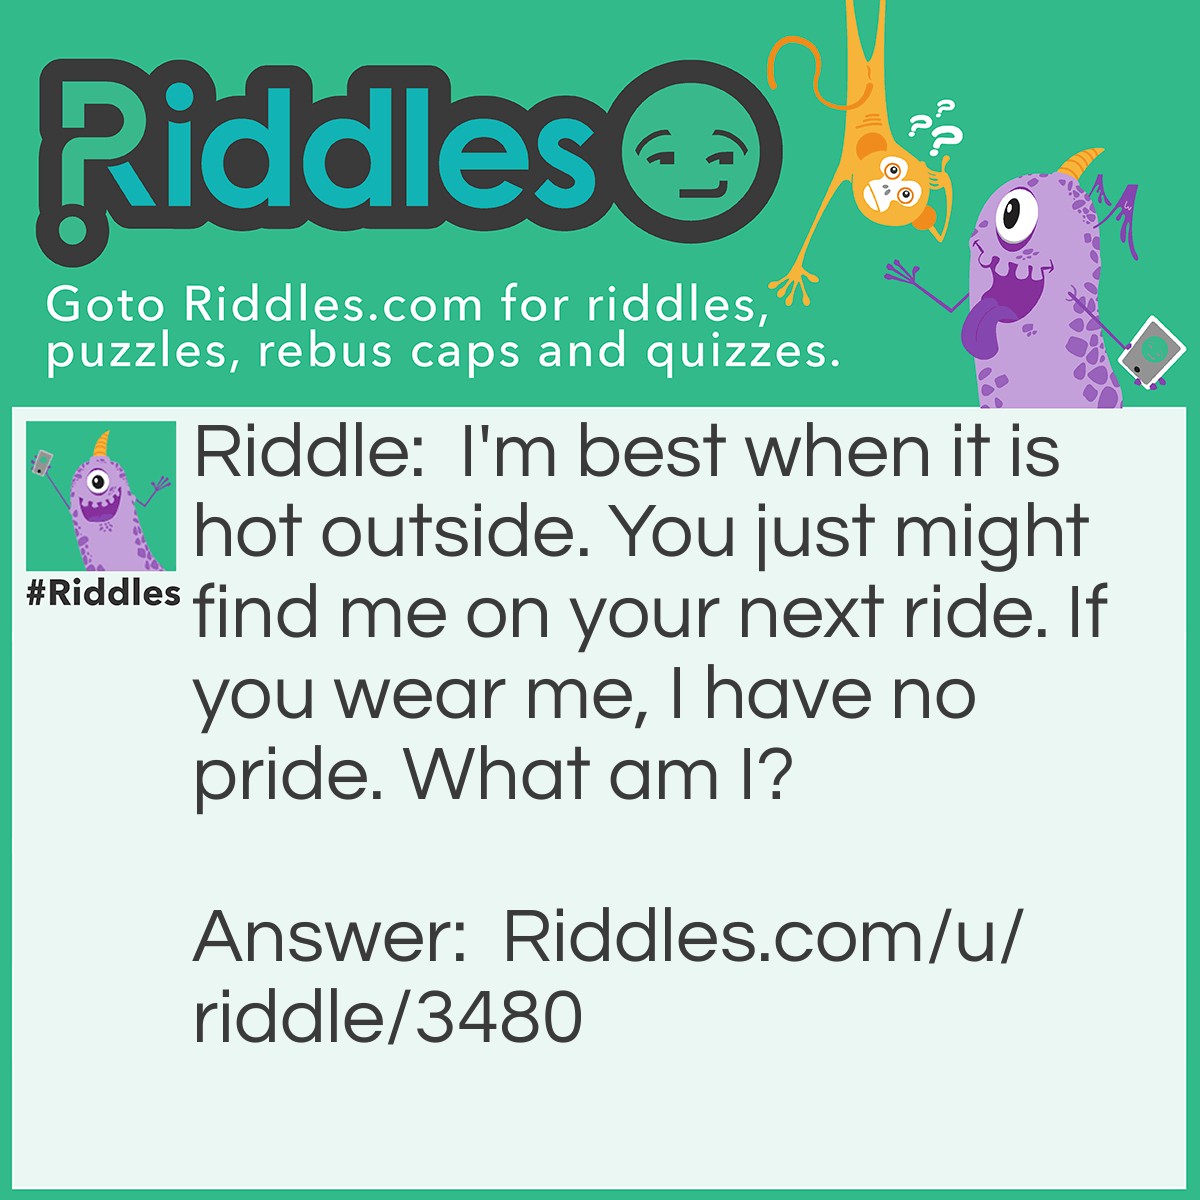 Riddle: I'm best when it is hot outside. You just might find me on your next ride. If you wear me, I have no pride. What am I? Answer: A cone. I'm best when it is hot outside. (Ice-cream cone) You just might find me on your next ride. (Traffic cone) If you wear me, I have no pride. (Dunce cap)